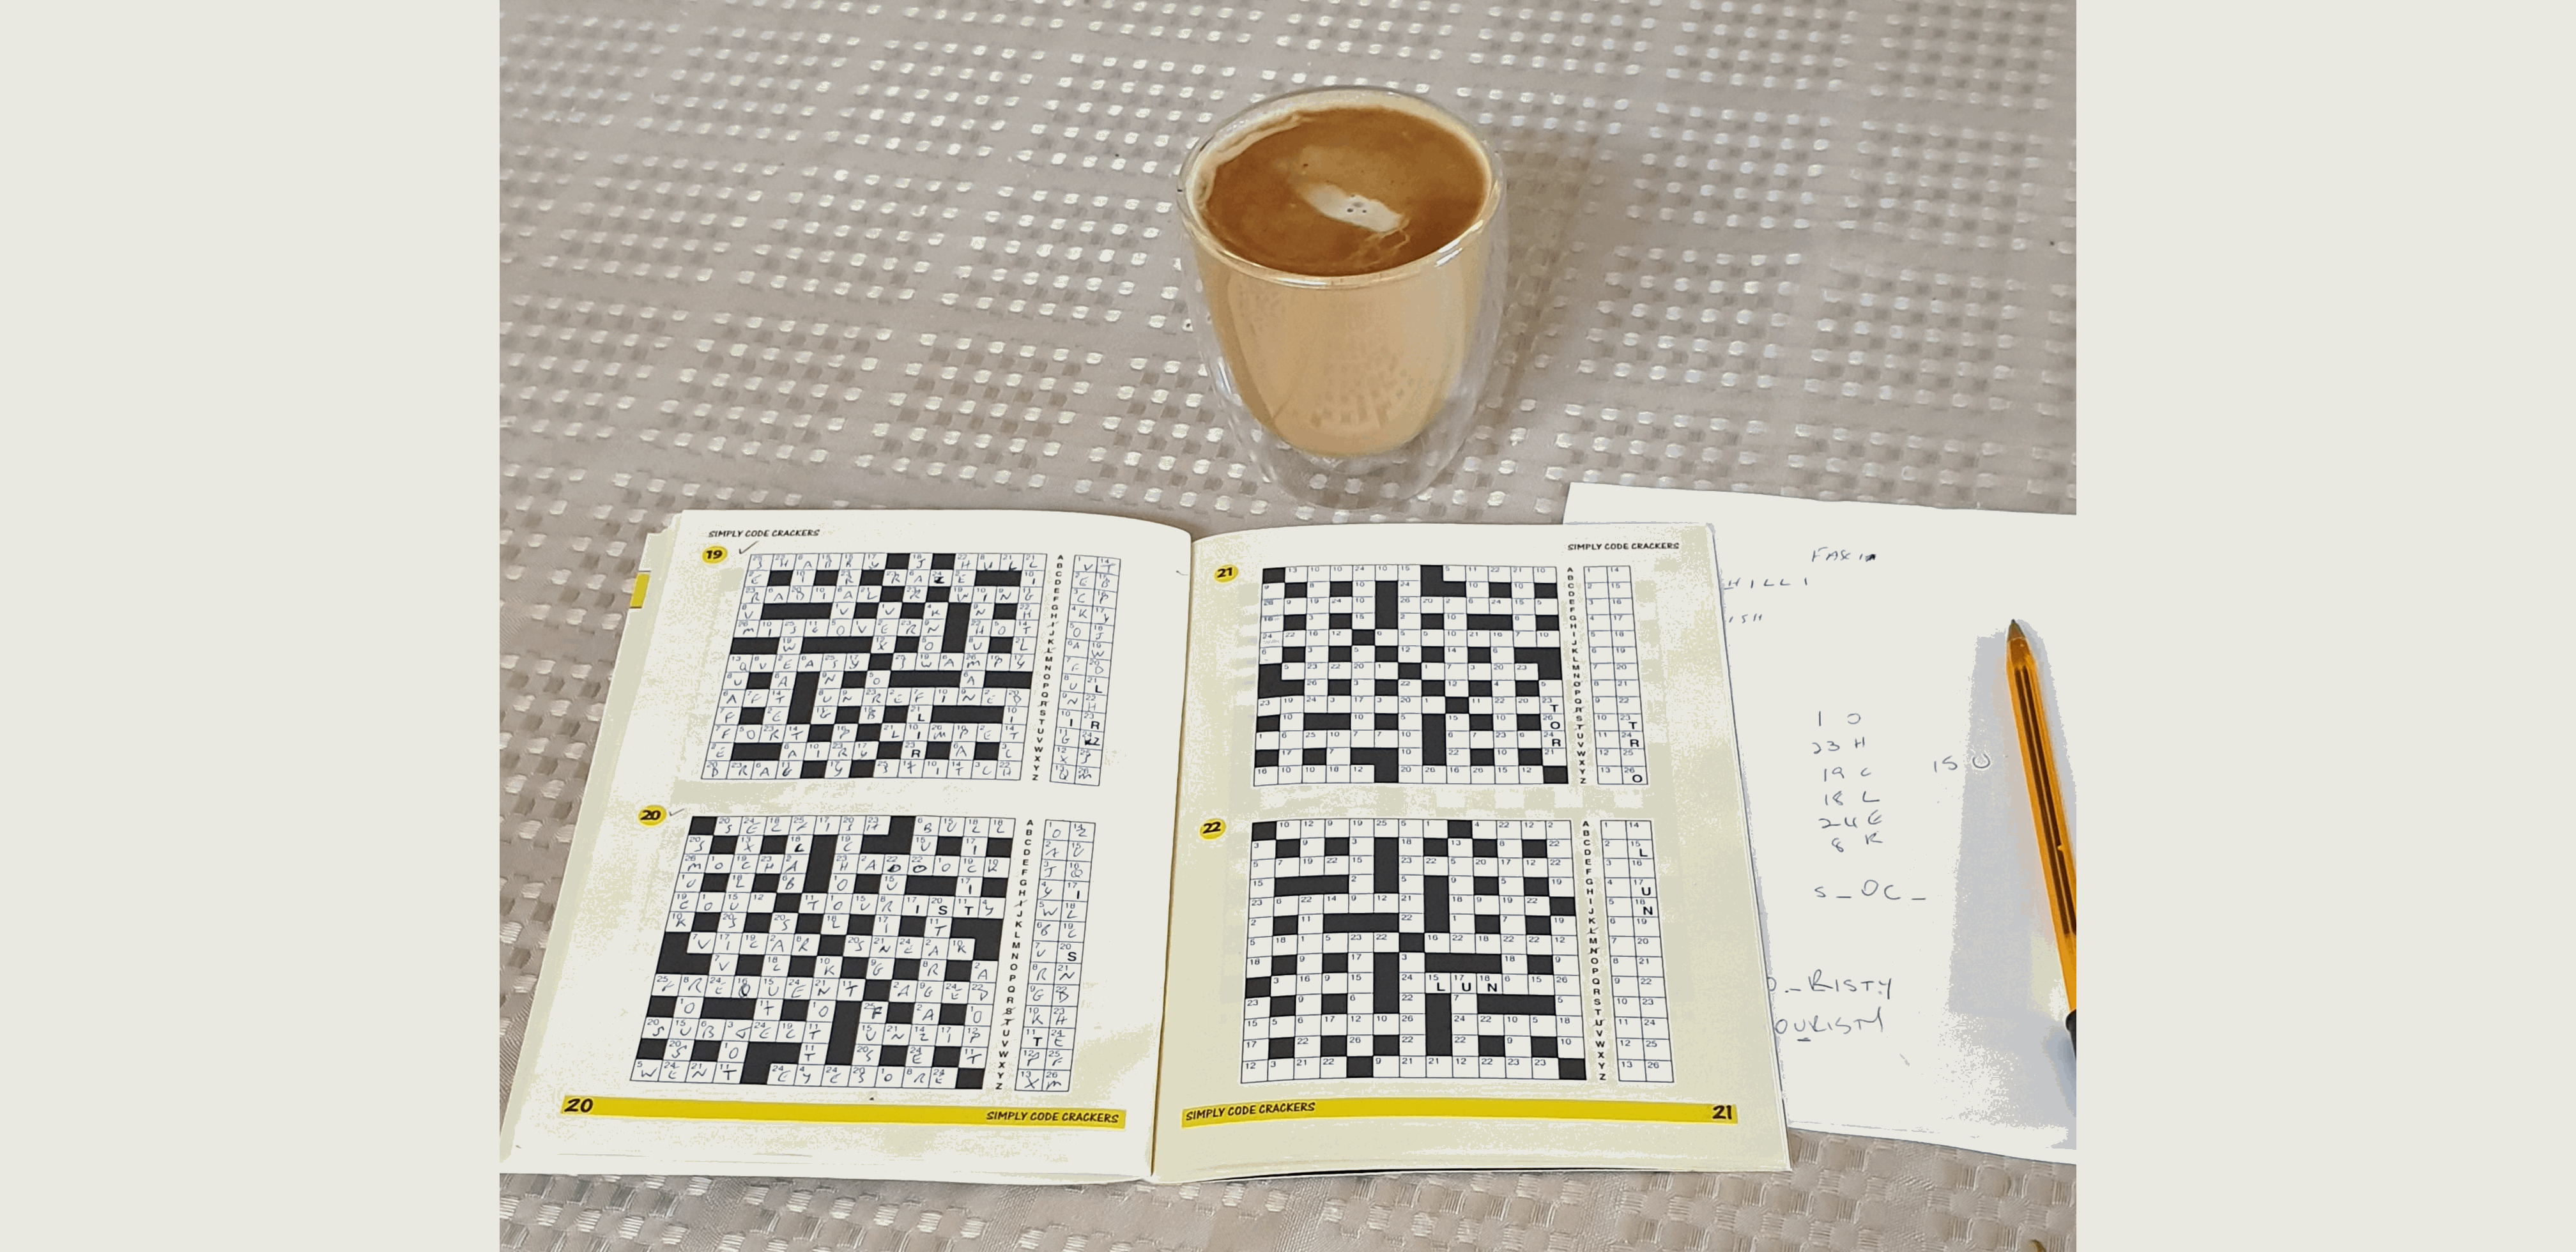 coffee and codecracker - a great combo